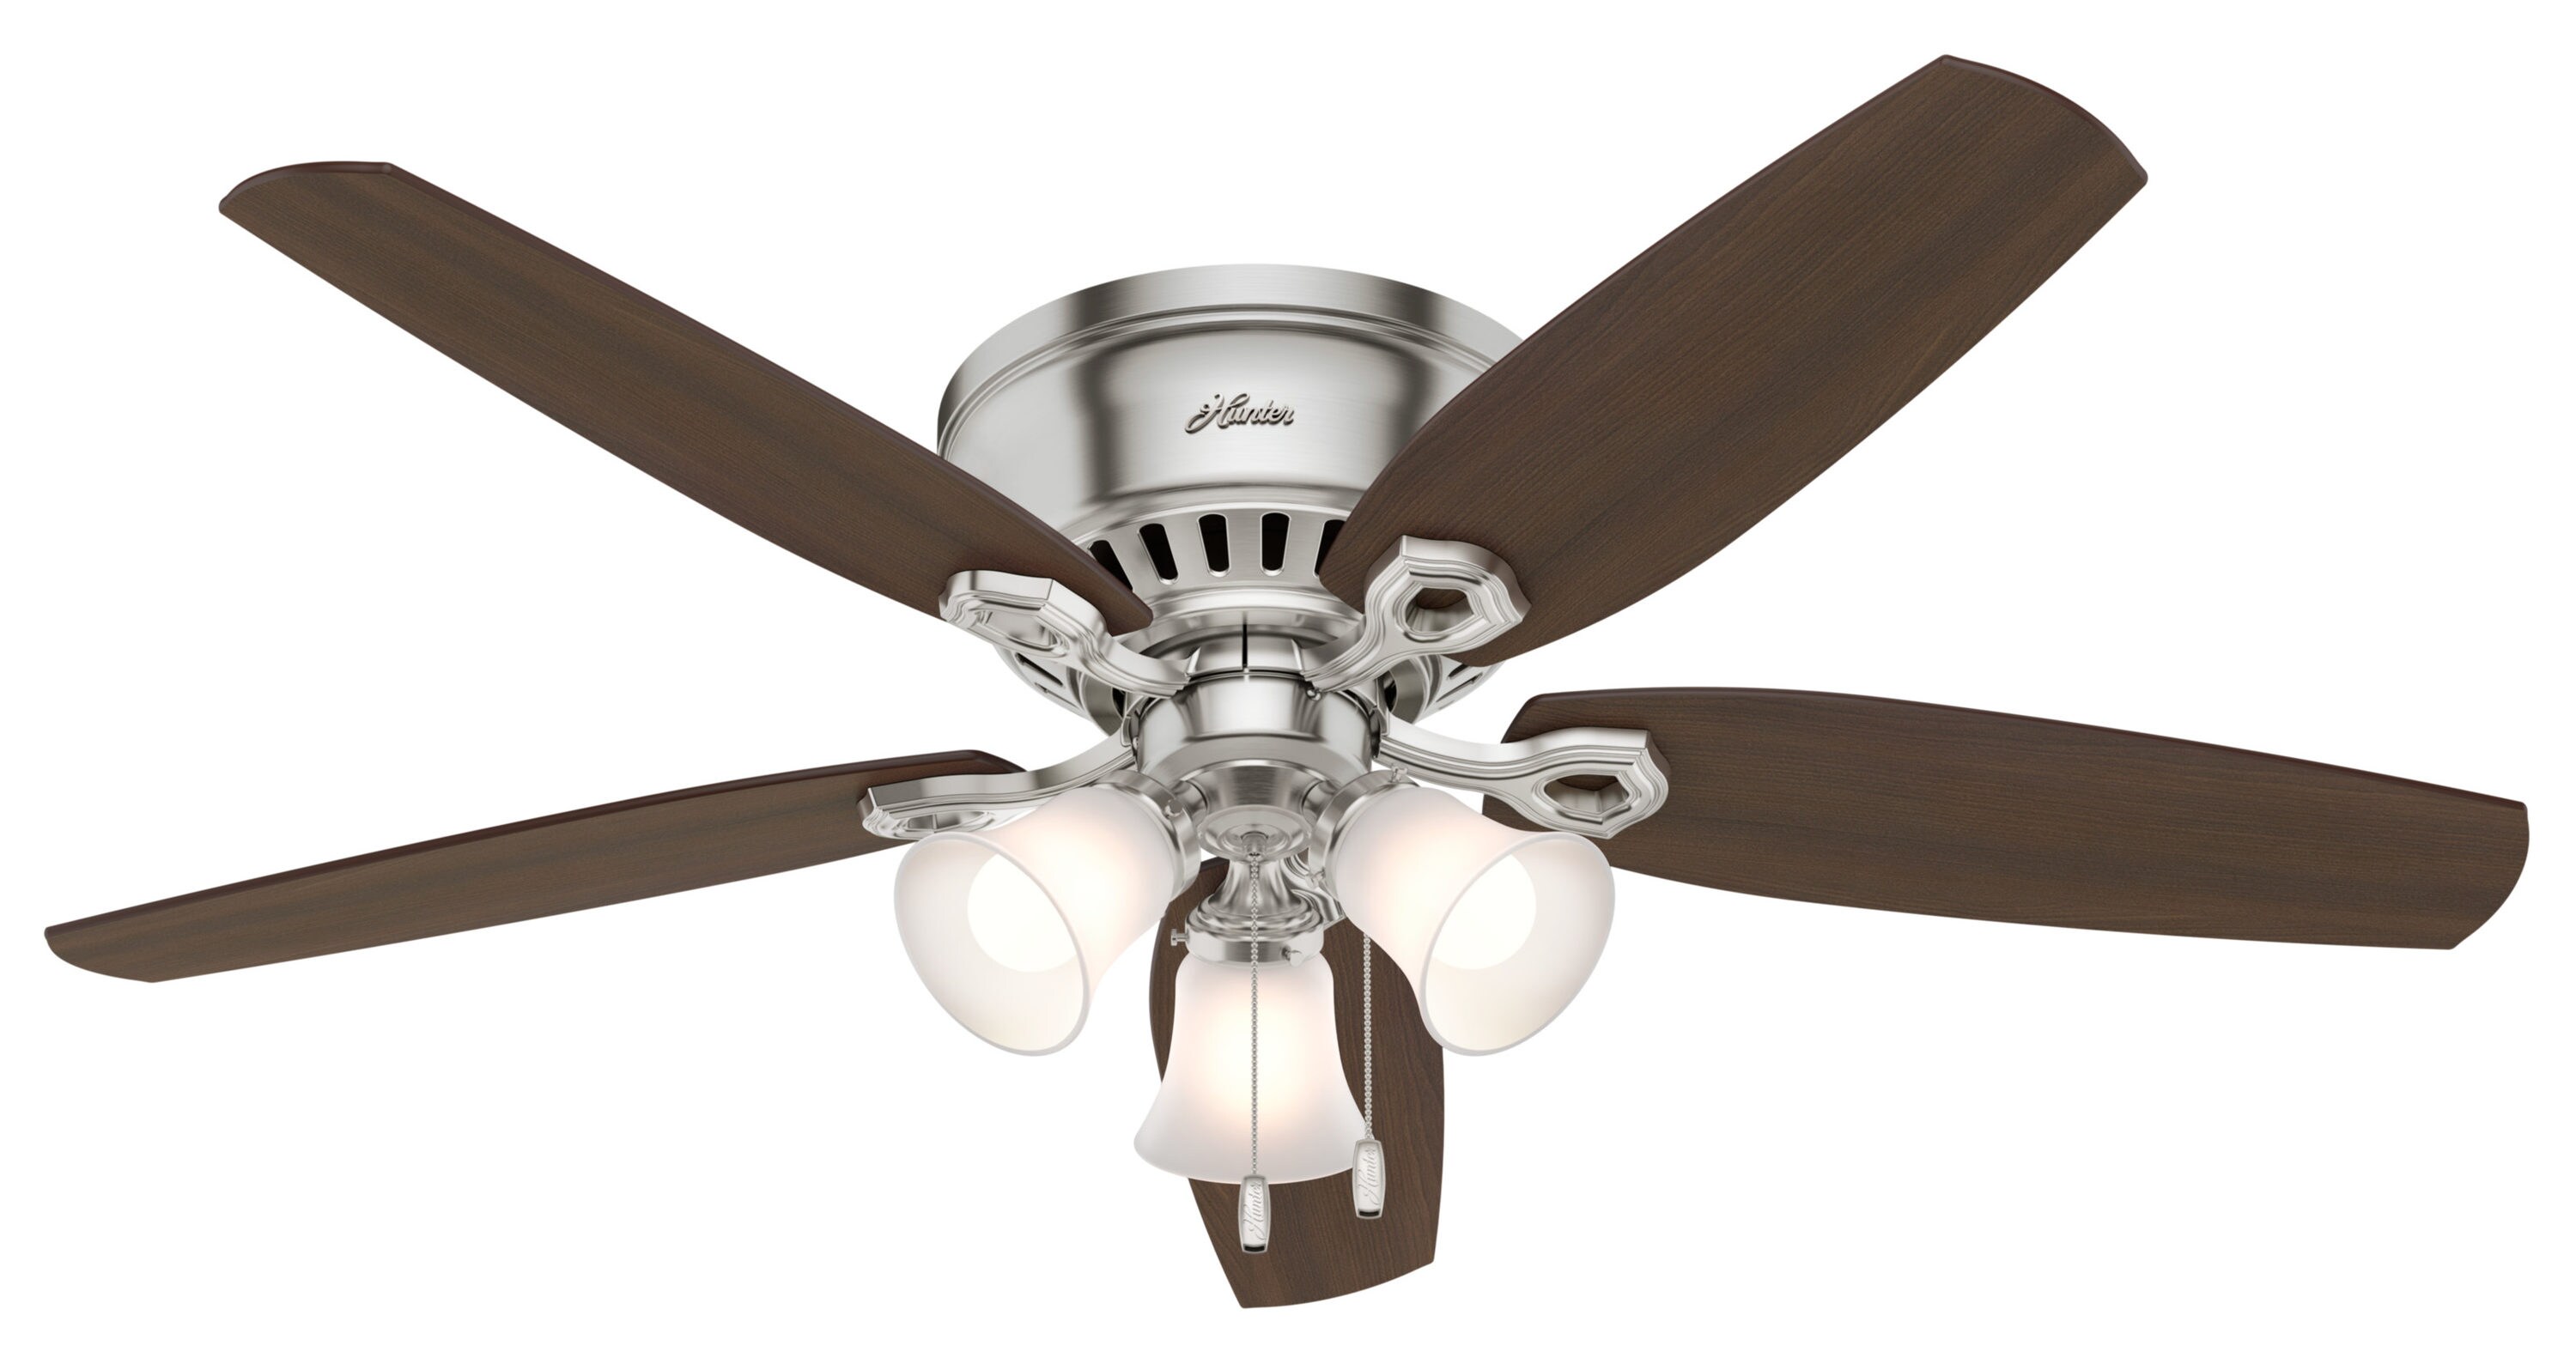 Brushed Nickel Ceiling Fan LED Light Frosted Dome Low Profile Quiet Motor 52 in 